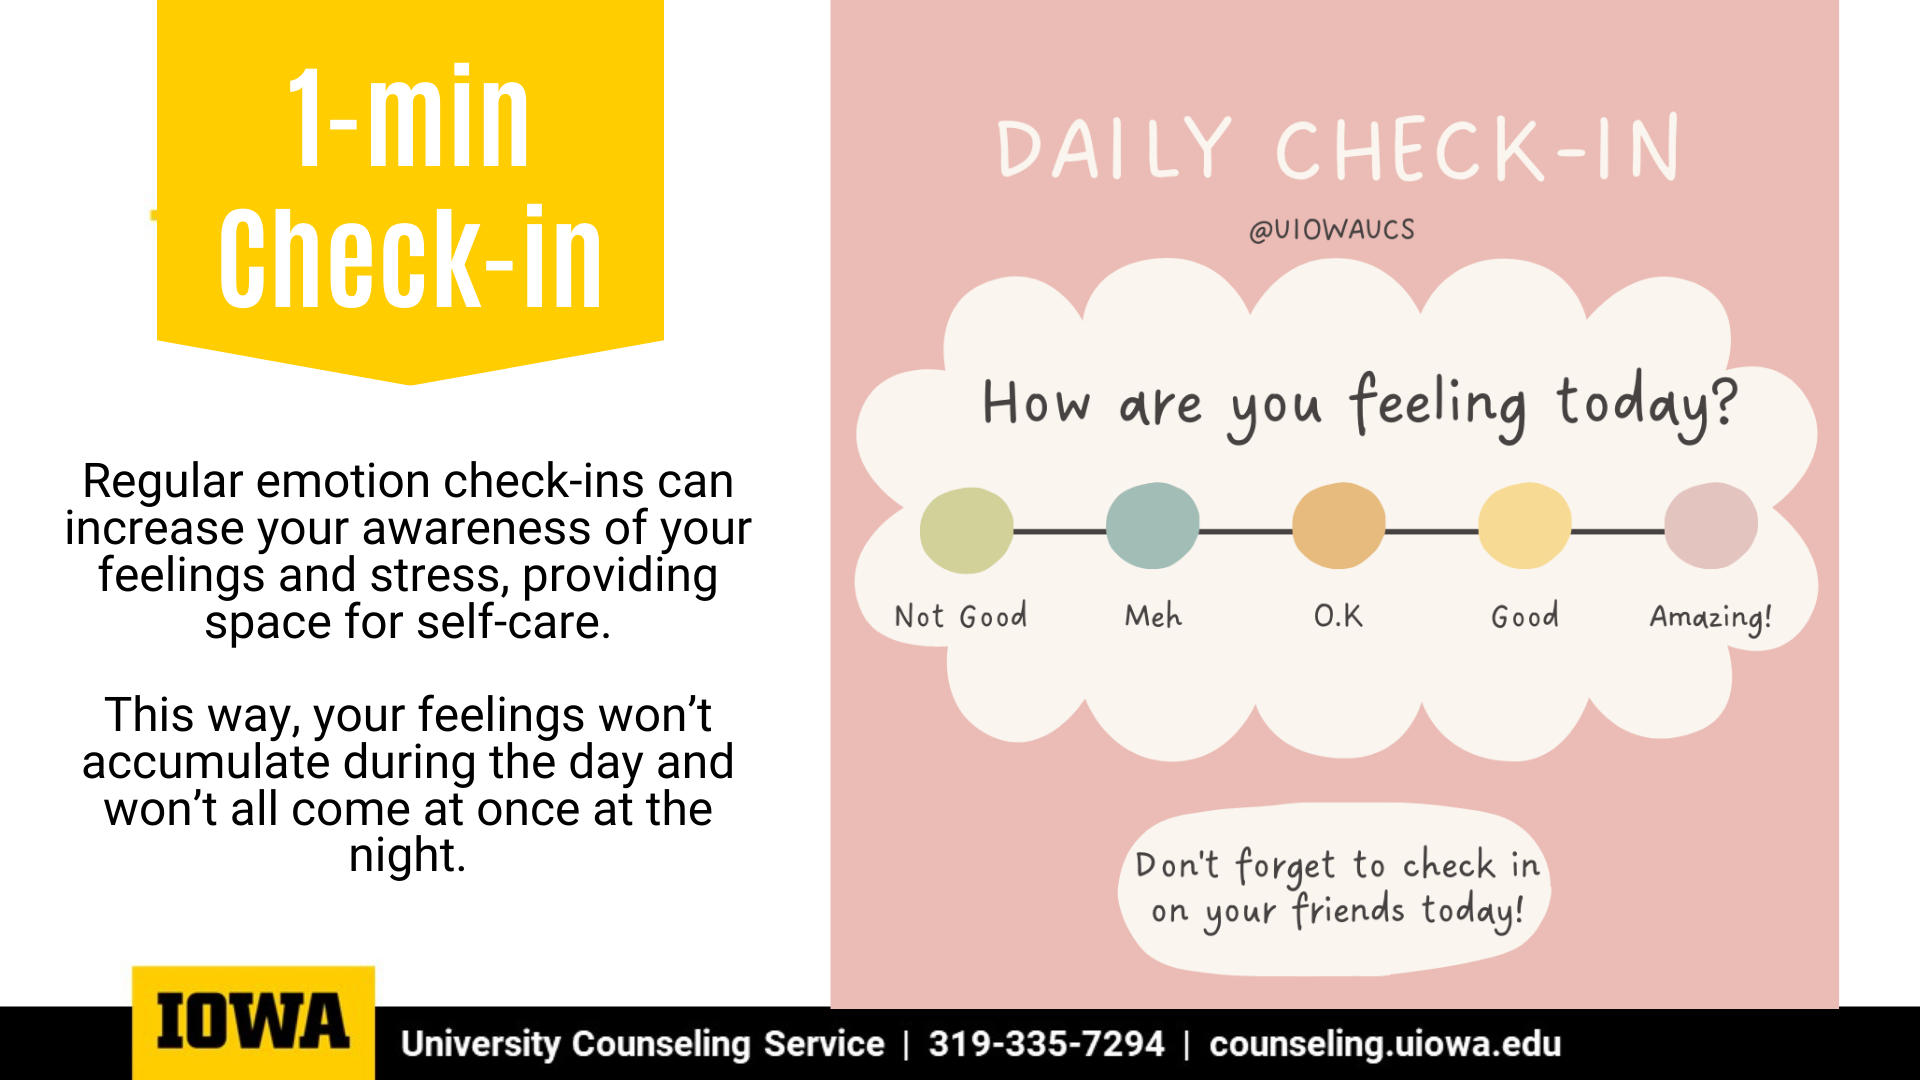 Performing regular emotional check-ins can increase your awareness of your feelings and stress.